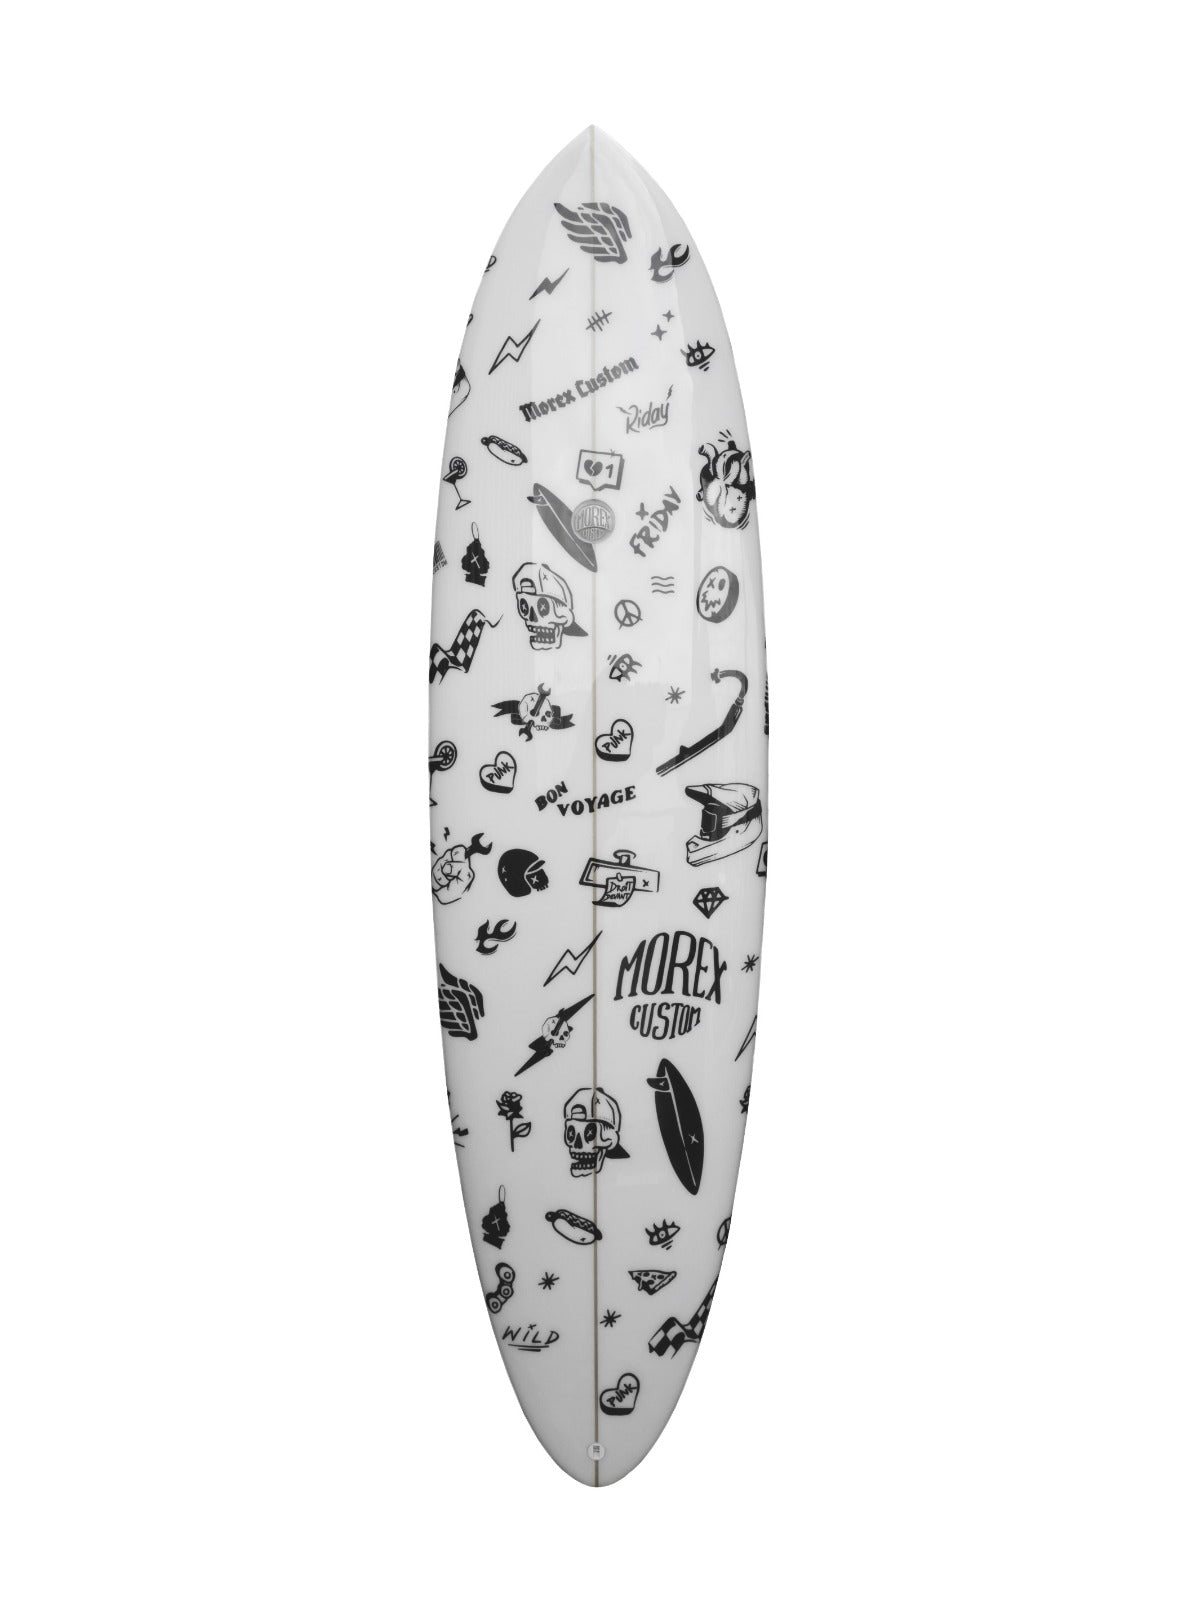 Midlenght  surfboard